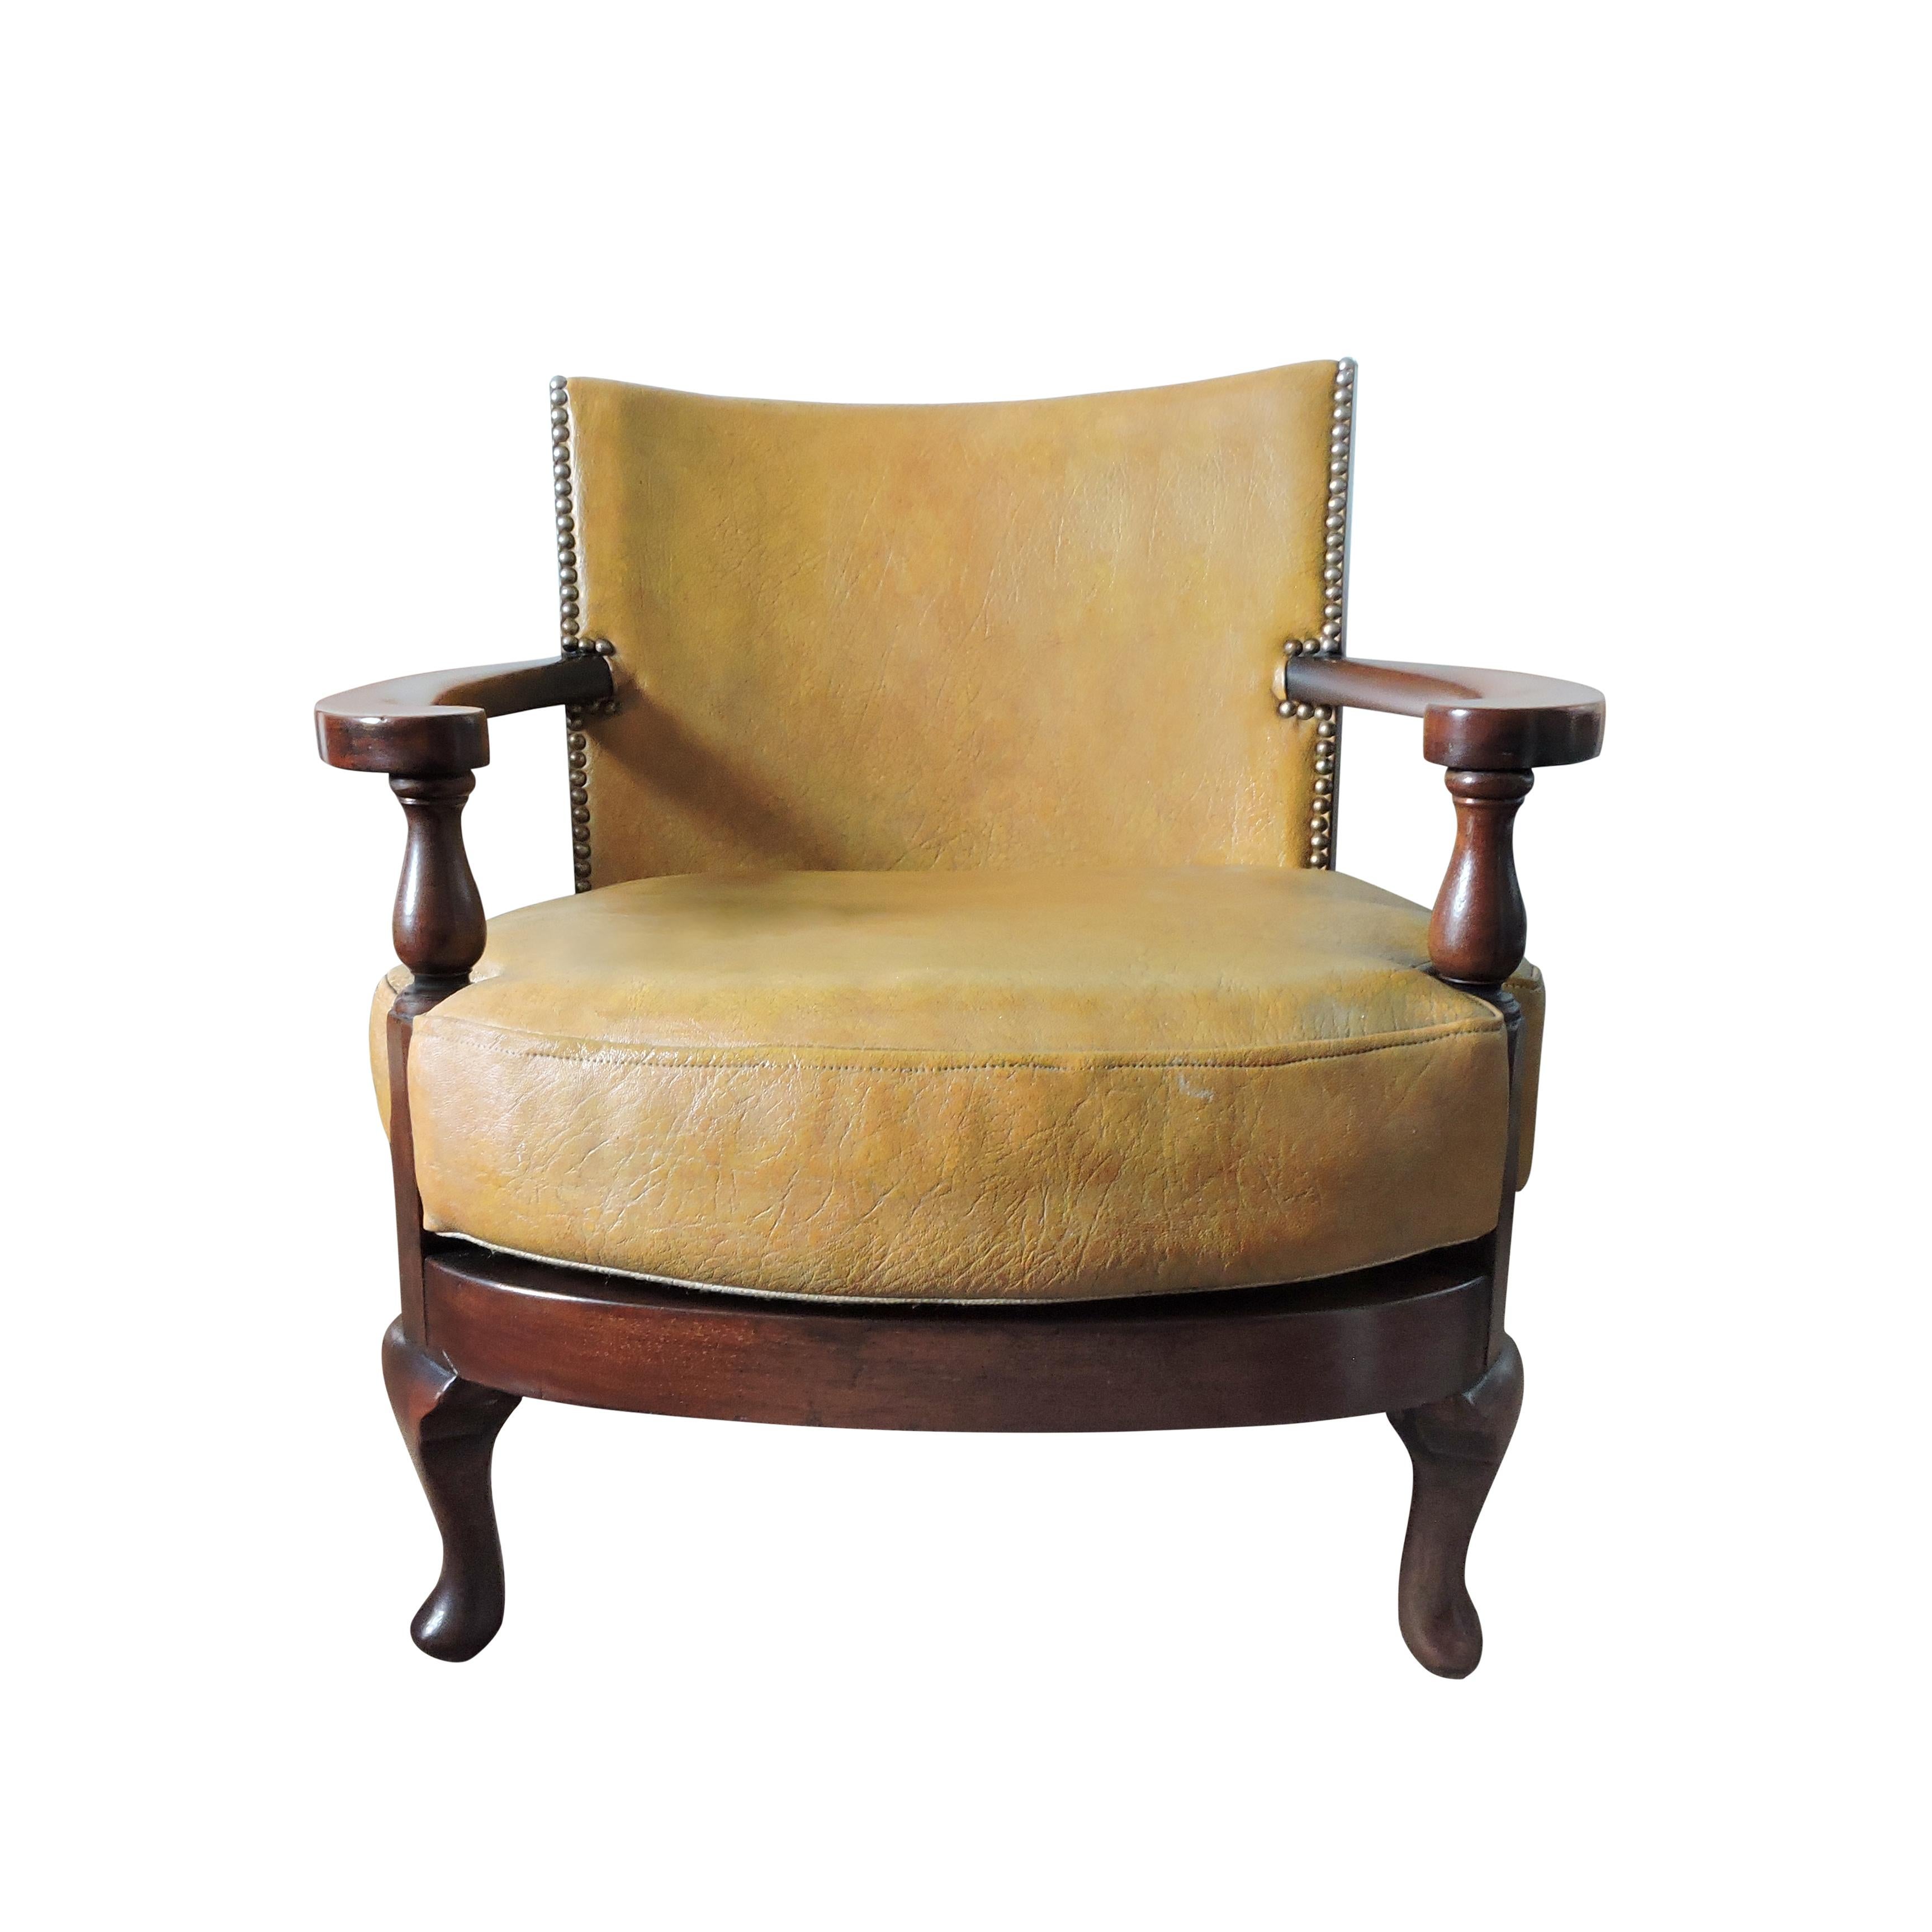 This early 20th century tub chair is made from leather and wood.